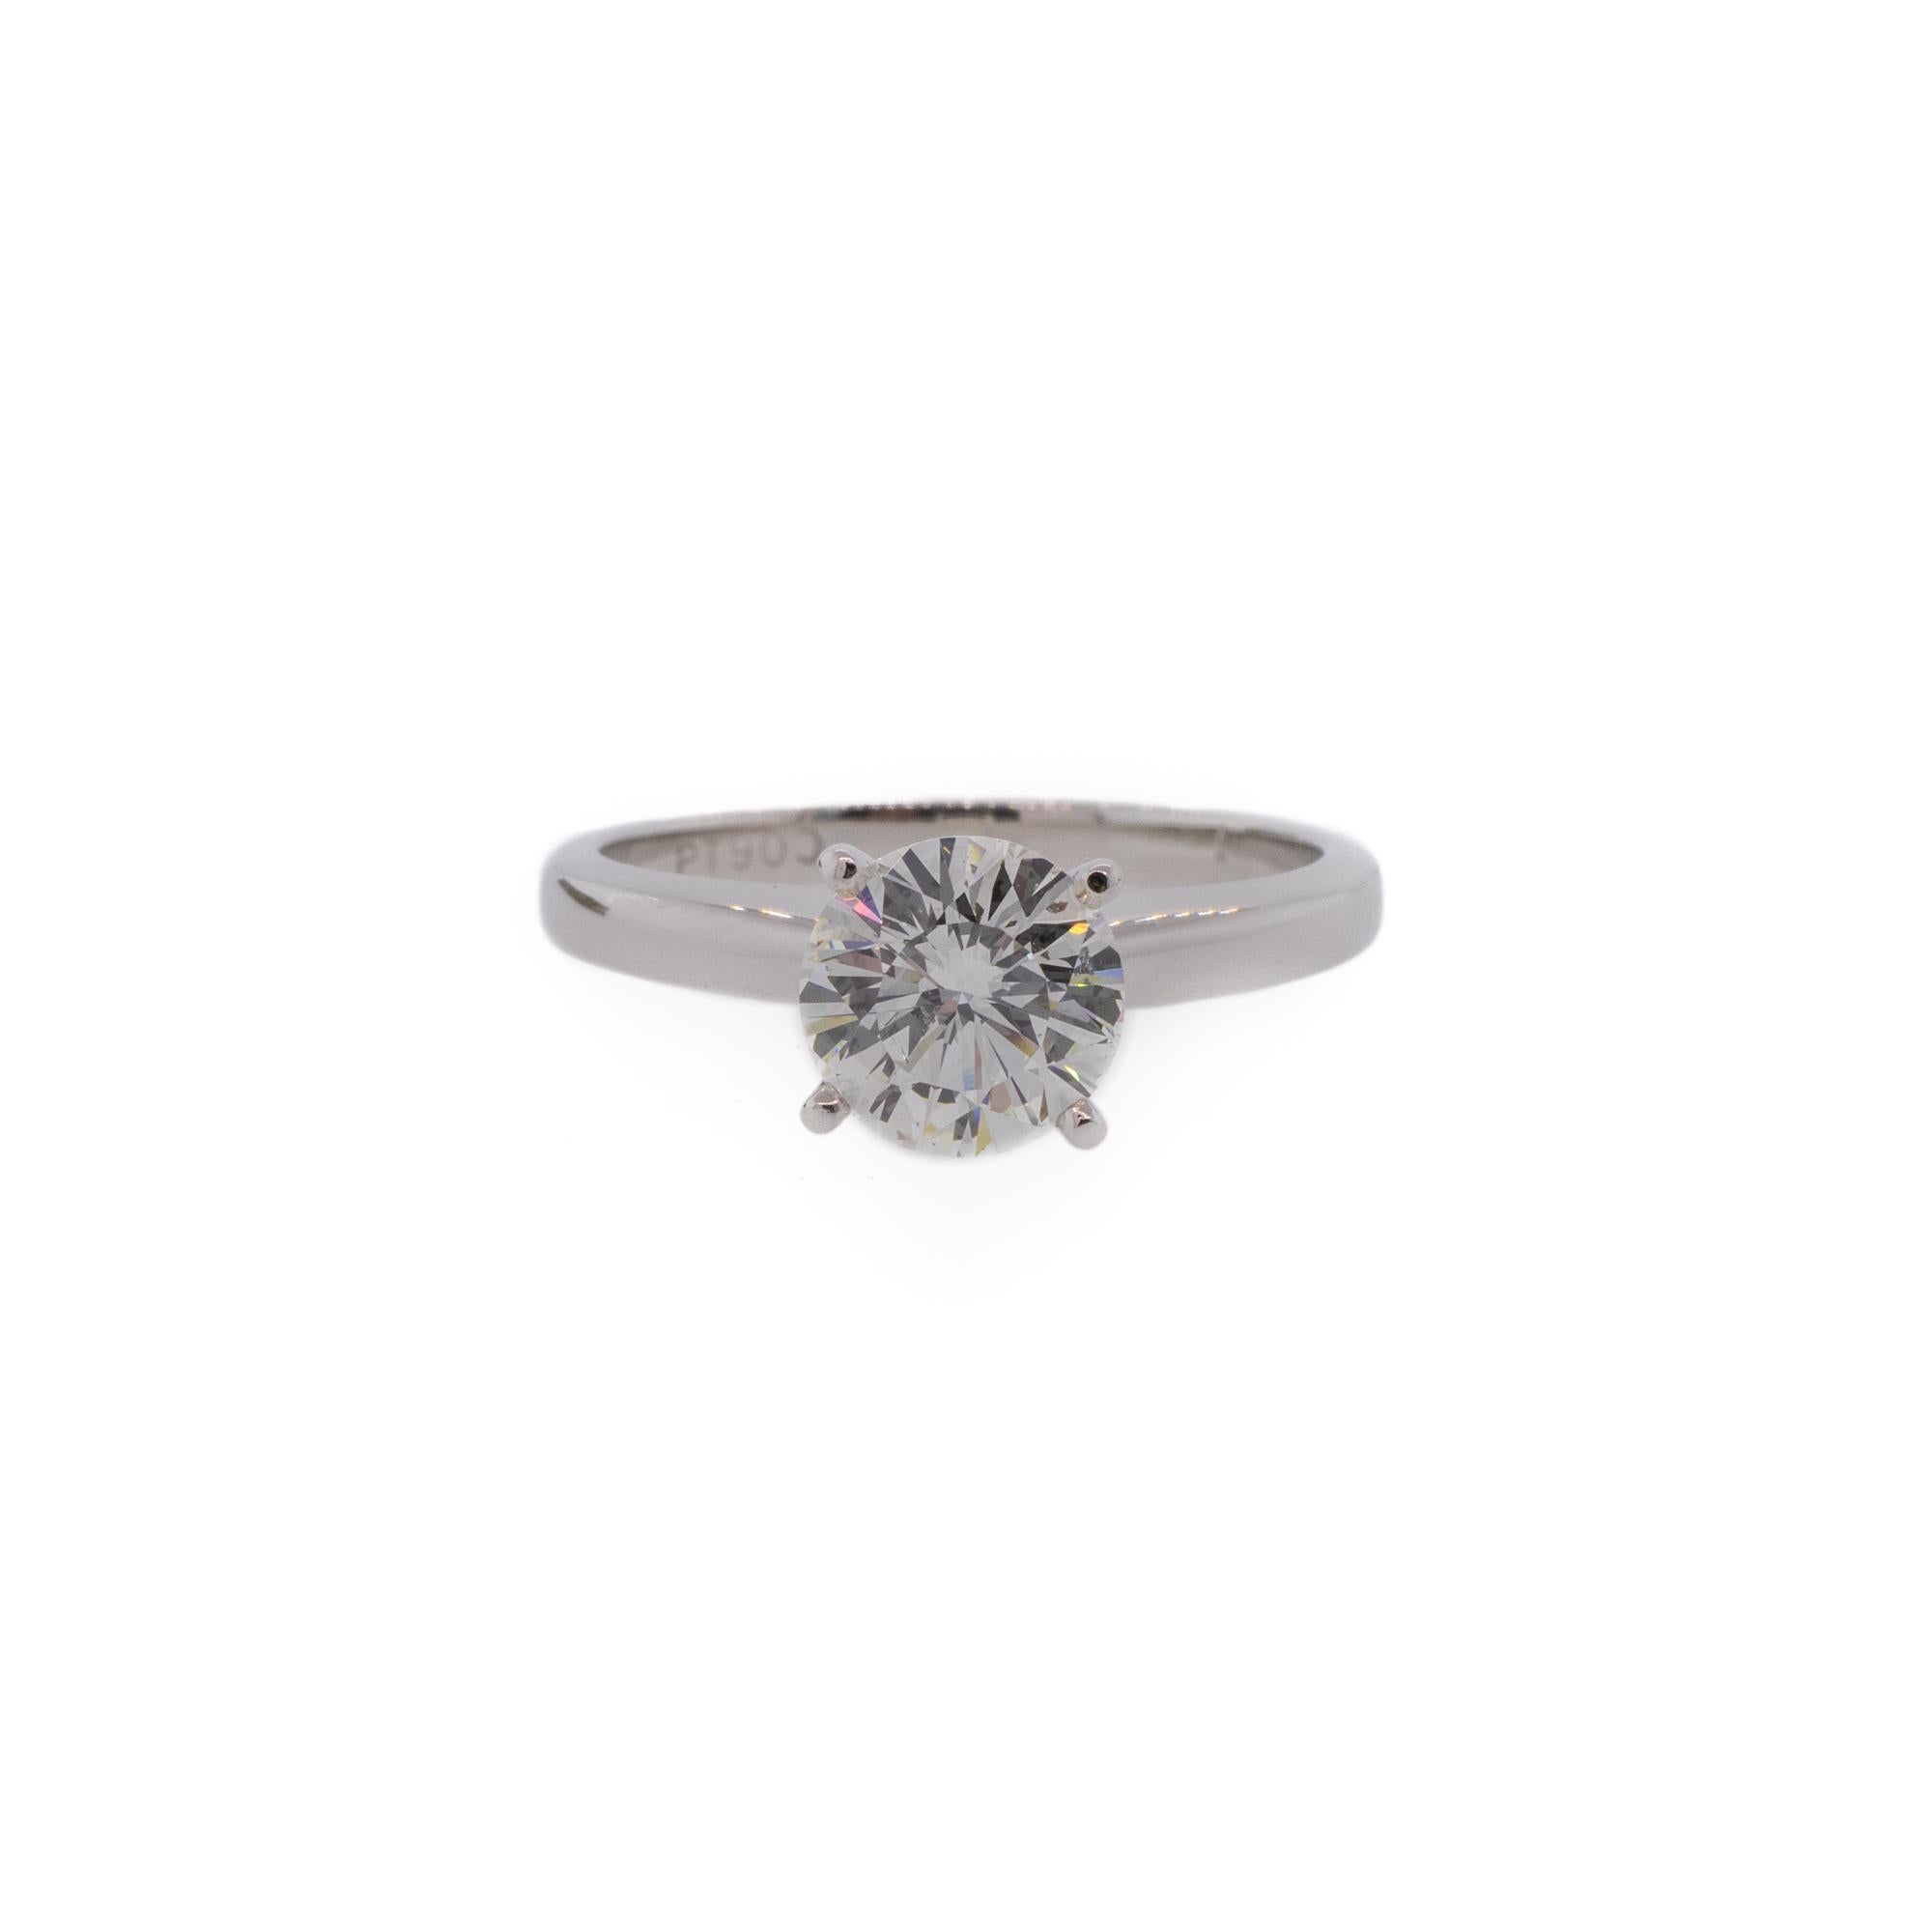 A round brilliant cut diamond in a four-prong platinum solitaire setting is a perfect combination of elegance and minimalism. This diamond is 1.07ct, rated I for color and SI2 for clarity, in a patented diamond cut called 